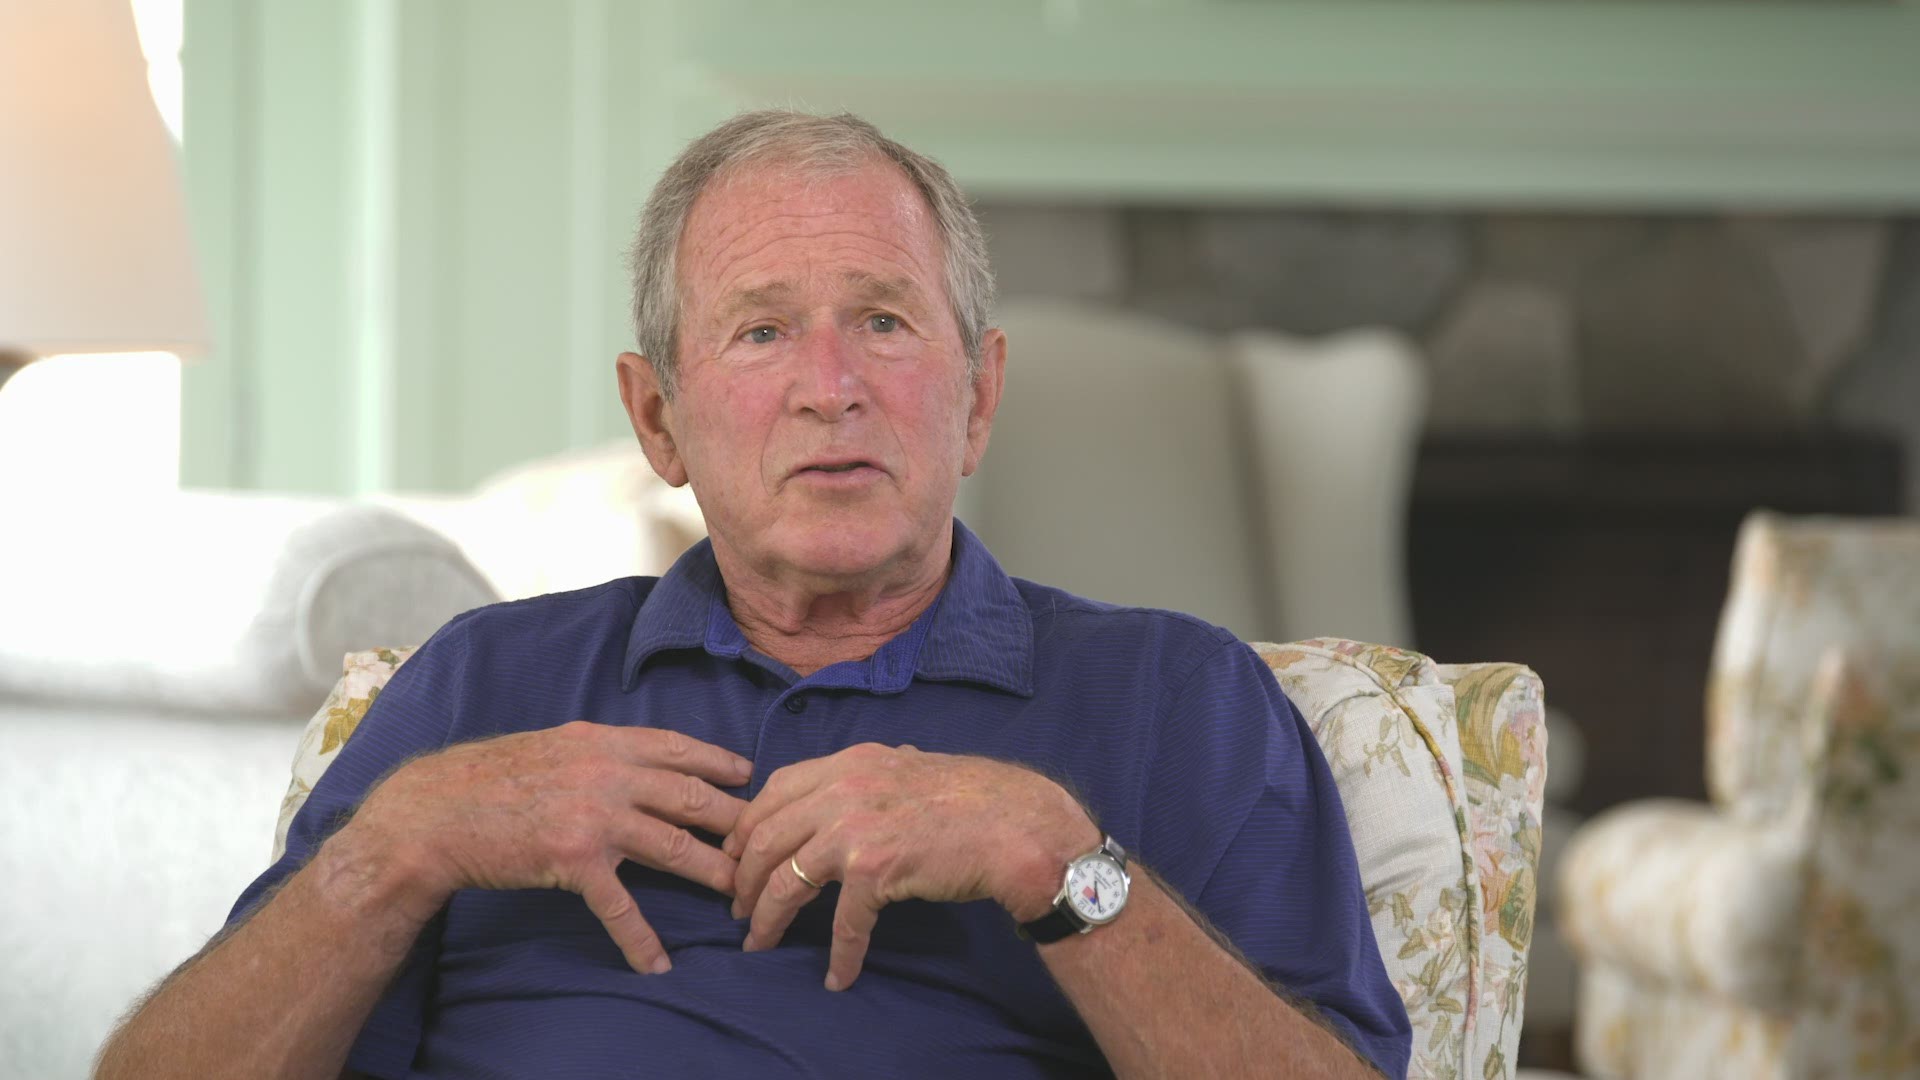 Former President George W. Bush encourages potential contributors to donate to Maine Medical Center, touting his family's positive experience with their care.